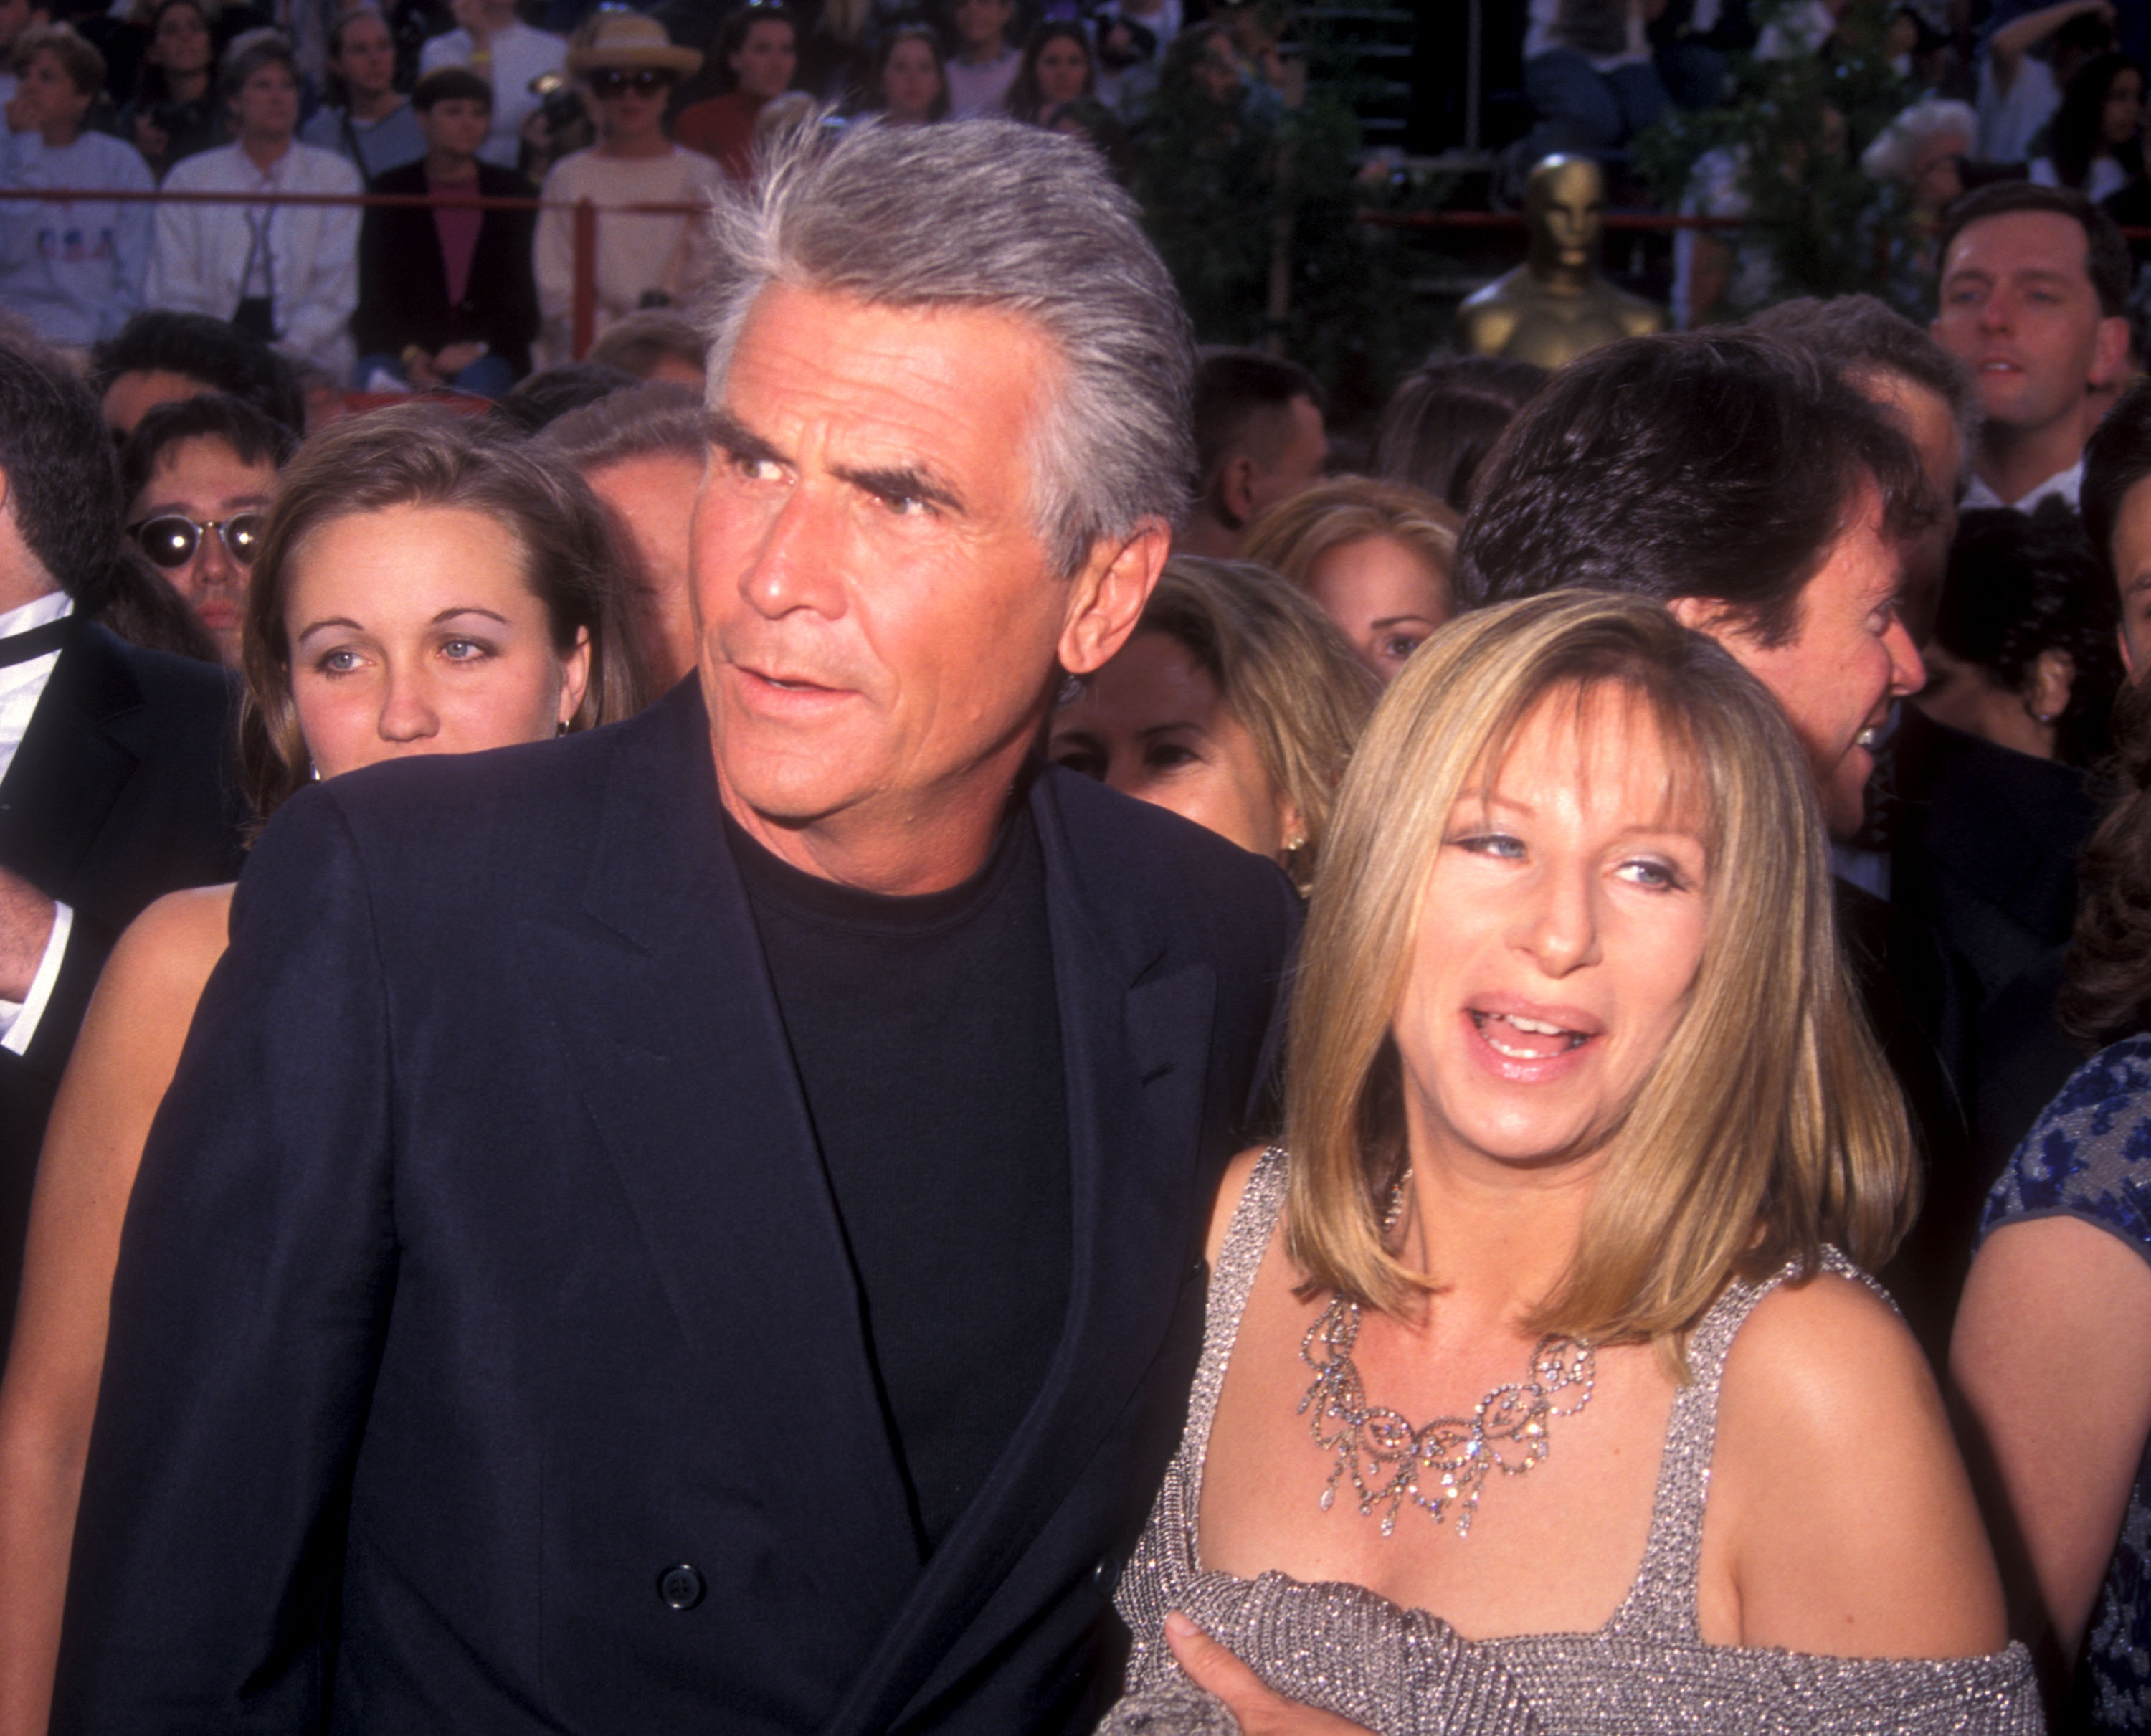 James Brolin and Barbra Streisand during the 69th Annual Academy Awards on March 24, 1997 | Source: Getty Images